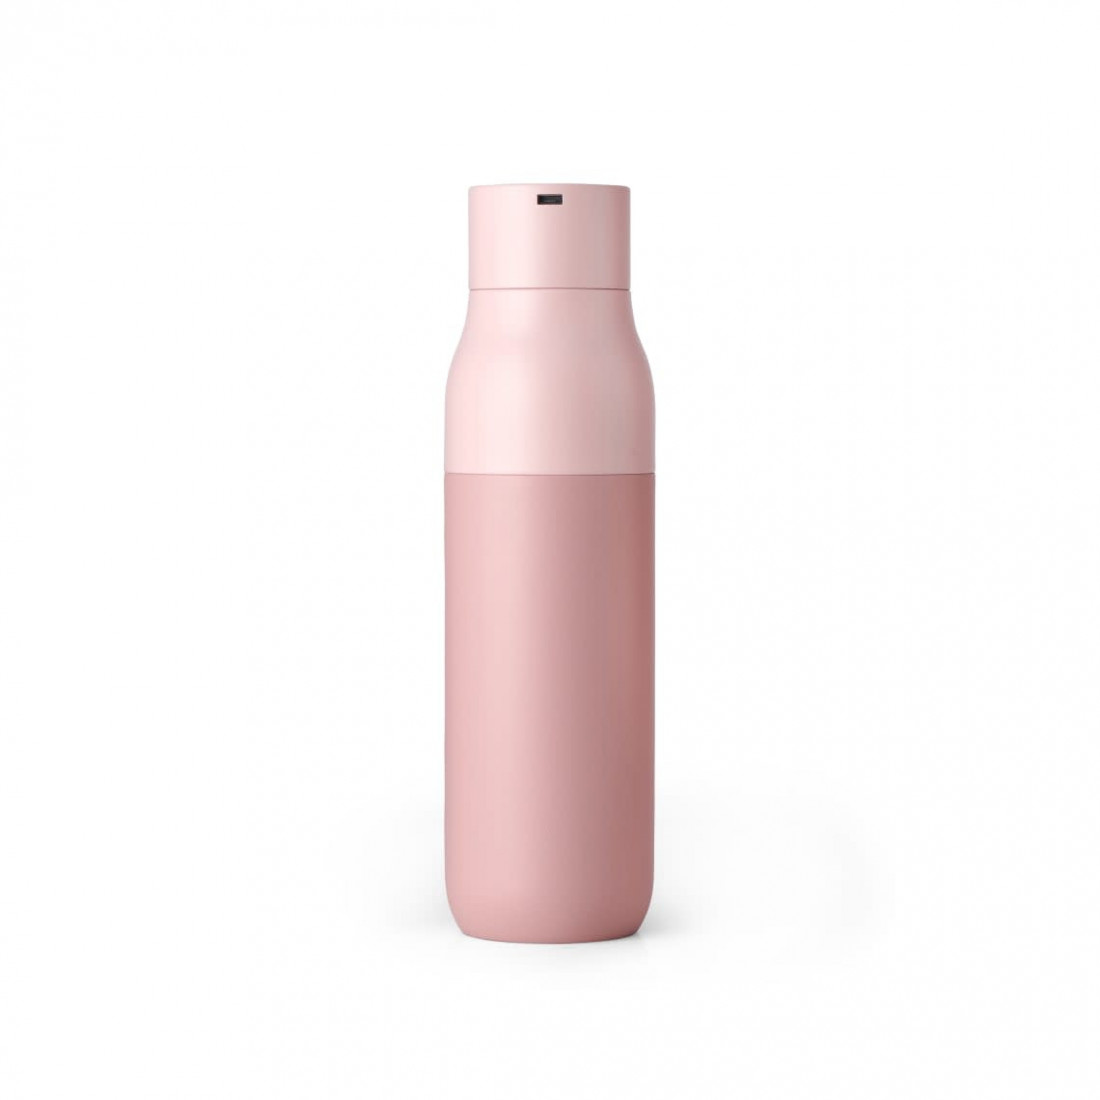 LARQ Bottle PureVis Himalayan Pink 500 ml - Insulated